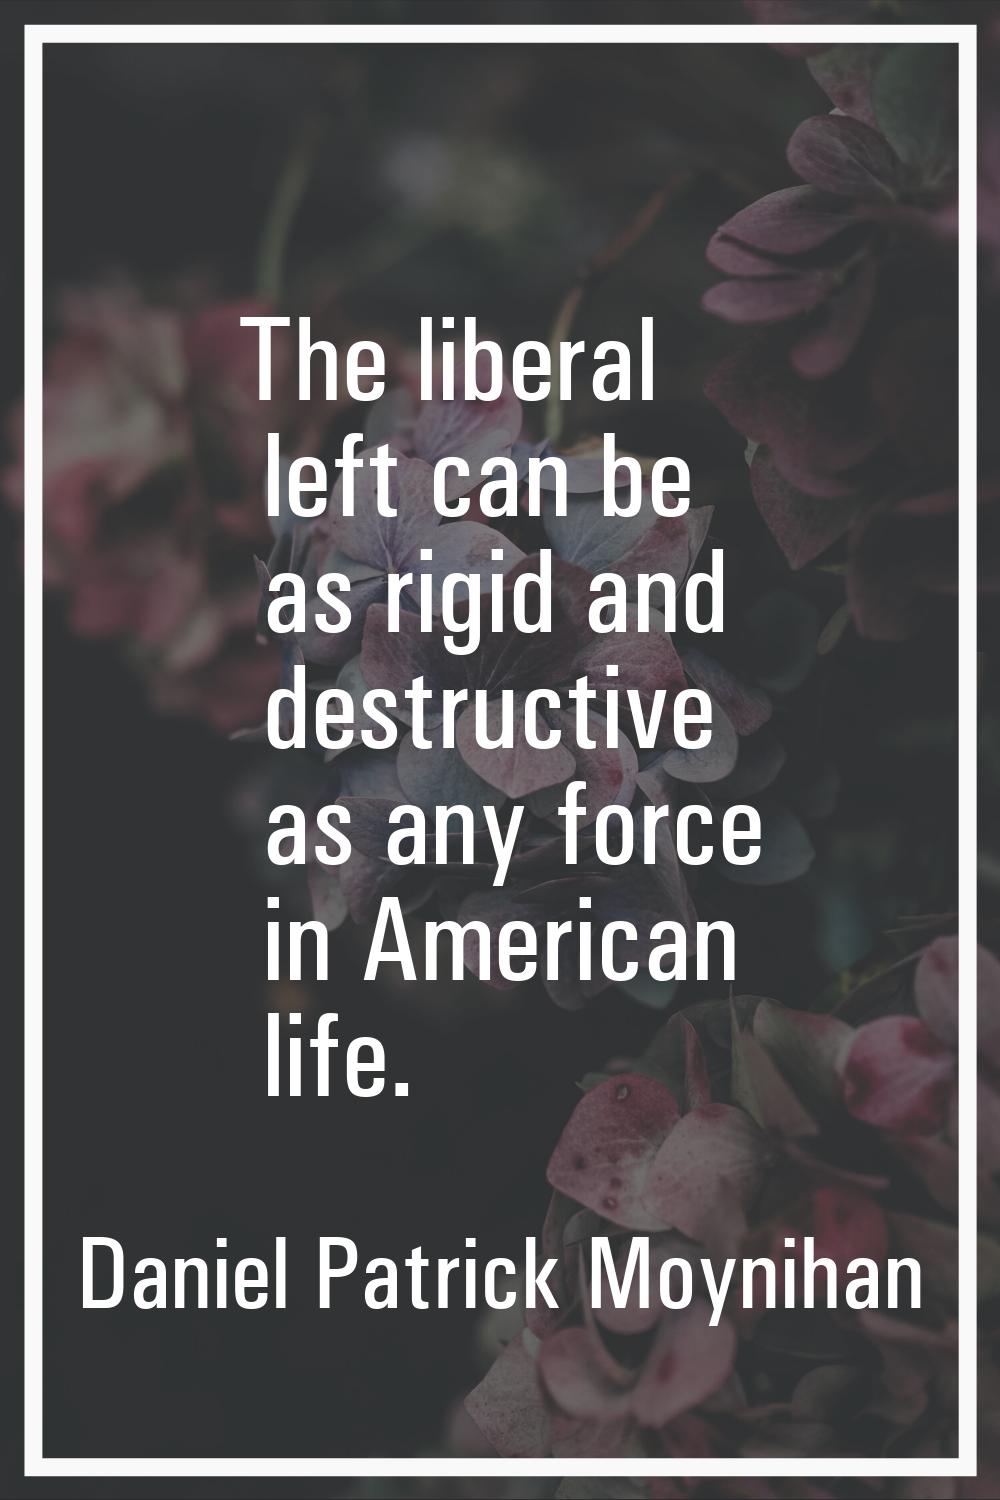 The liberal left can be as rigid and destructive as any force in American life.